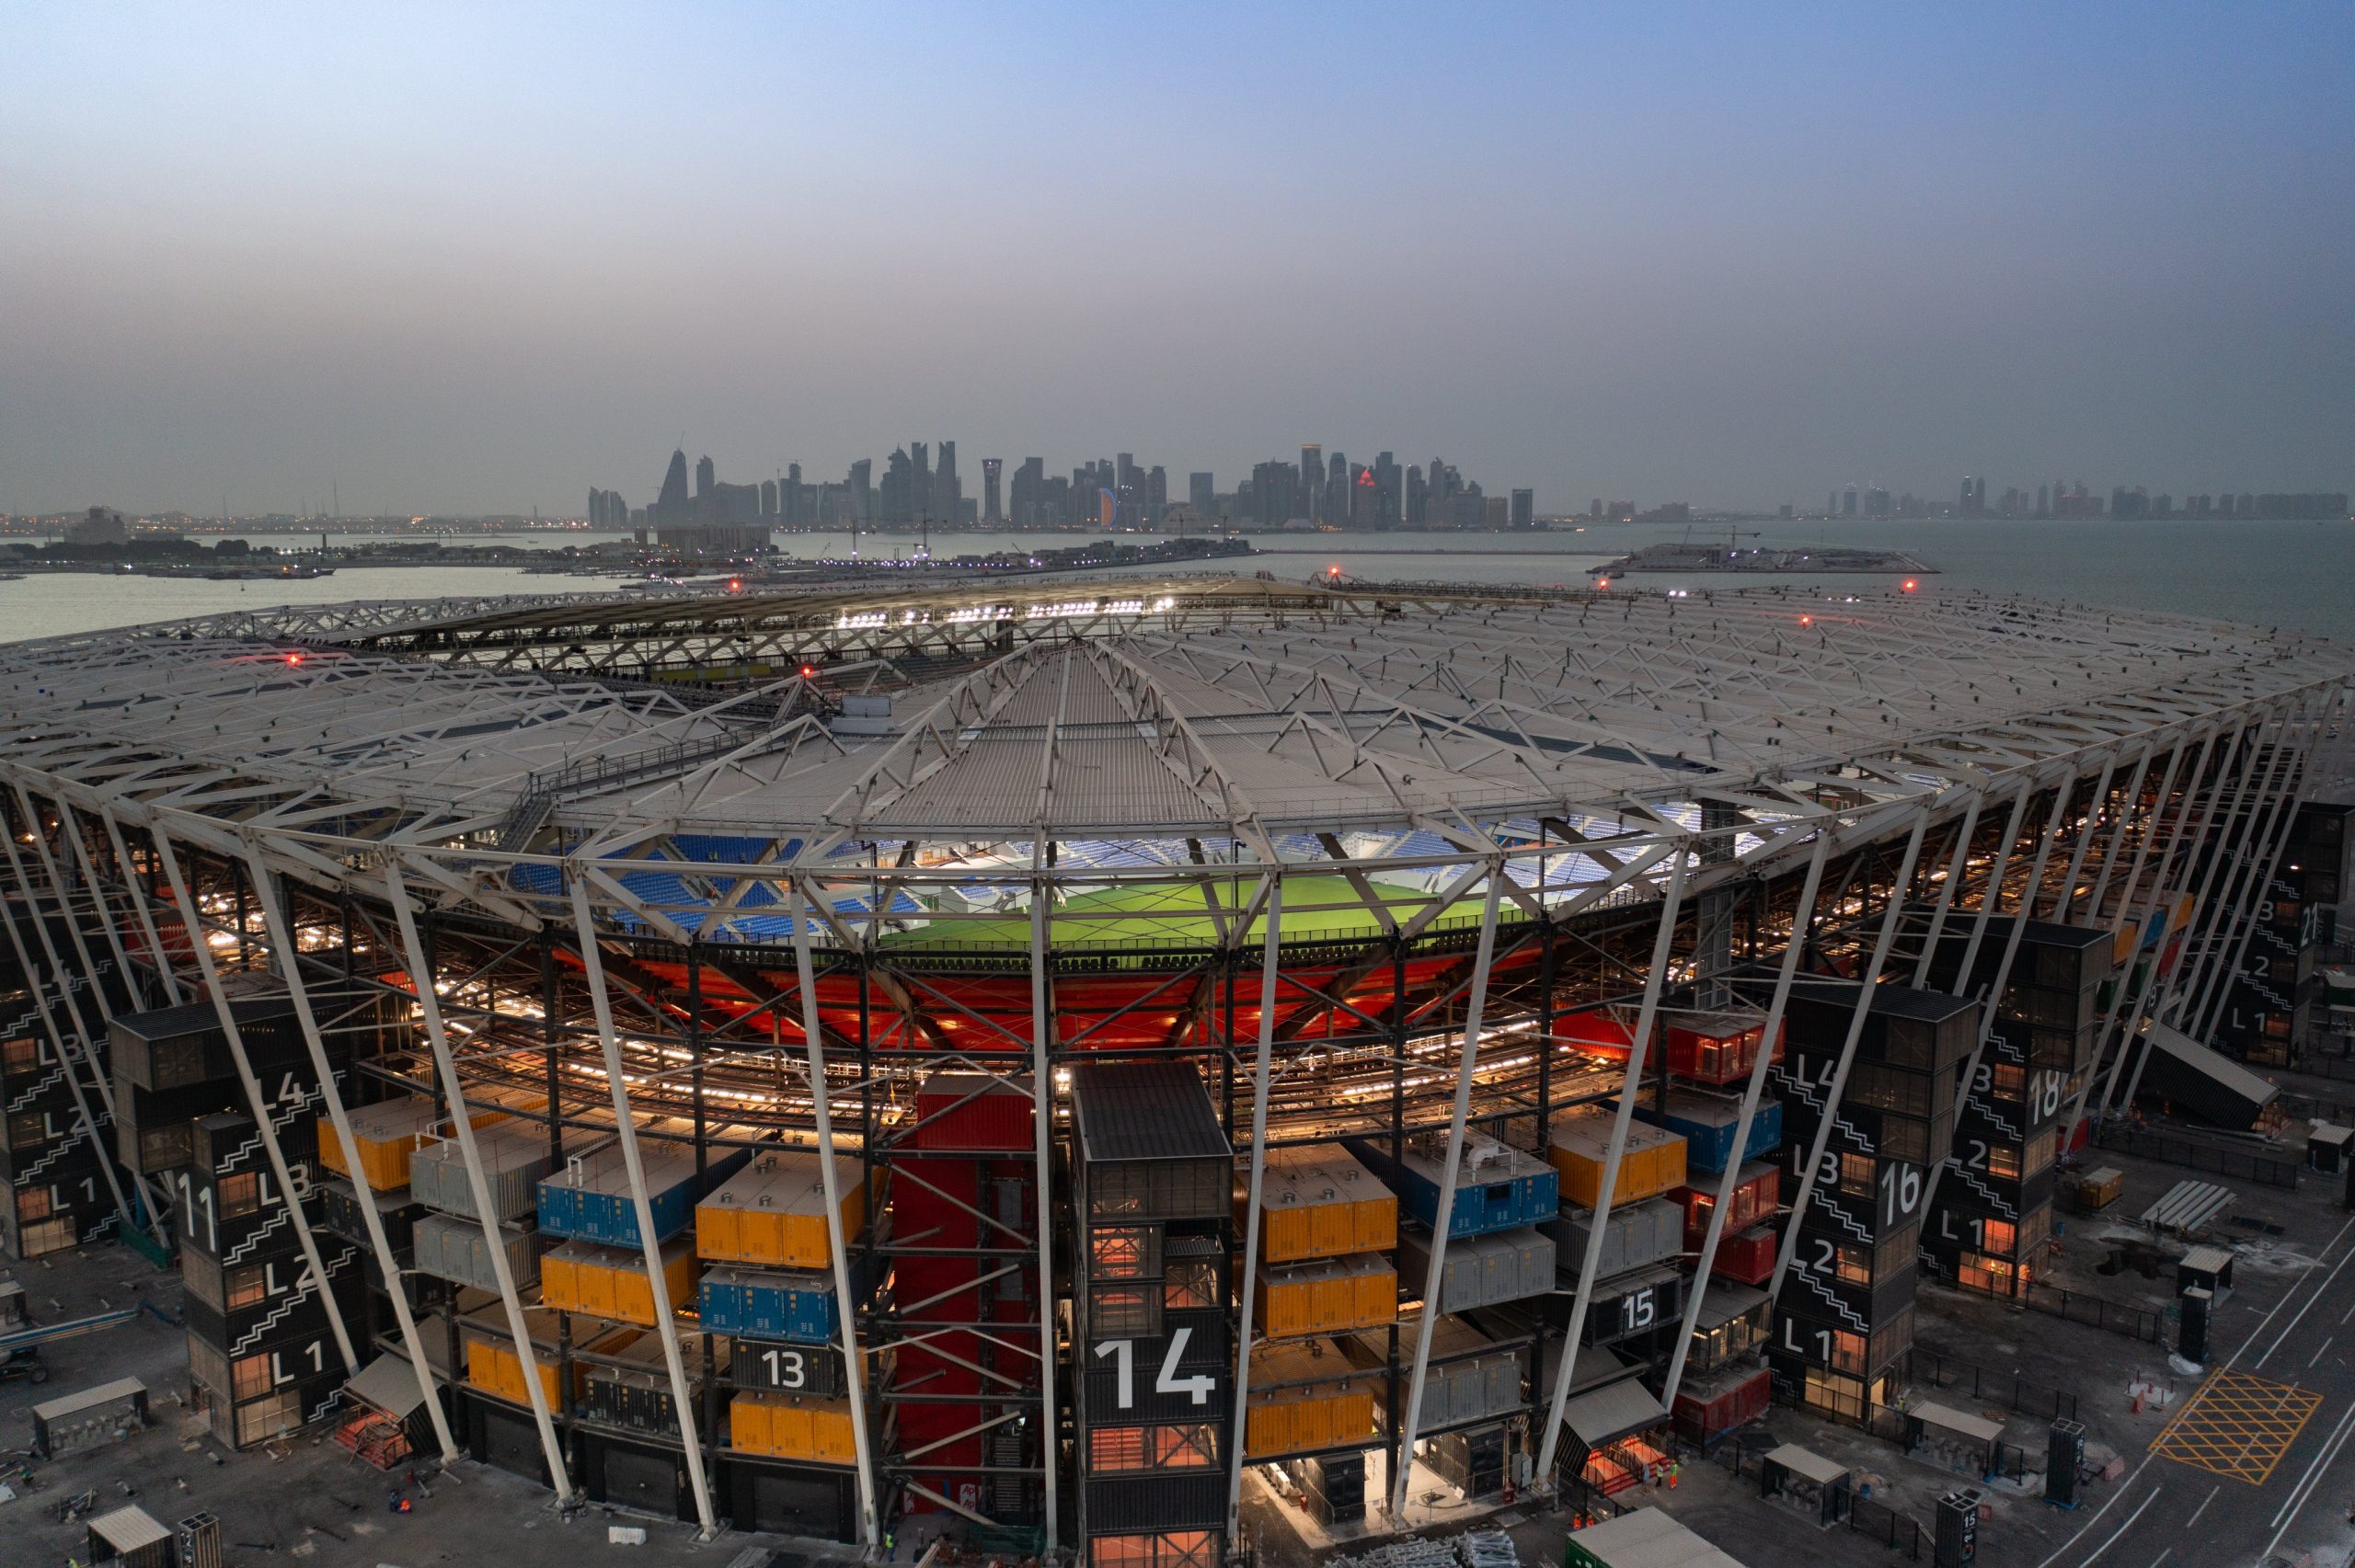 Qatar to host fashion, music spectacle before World Cup final